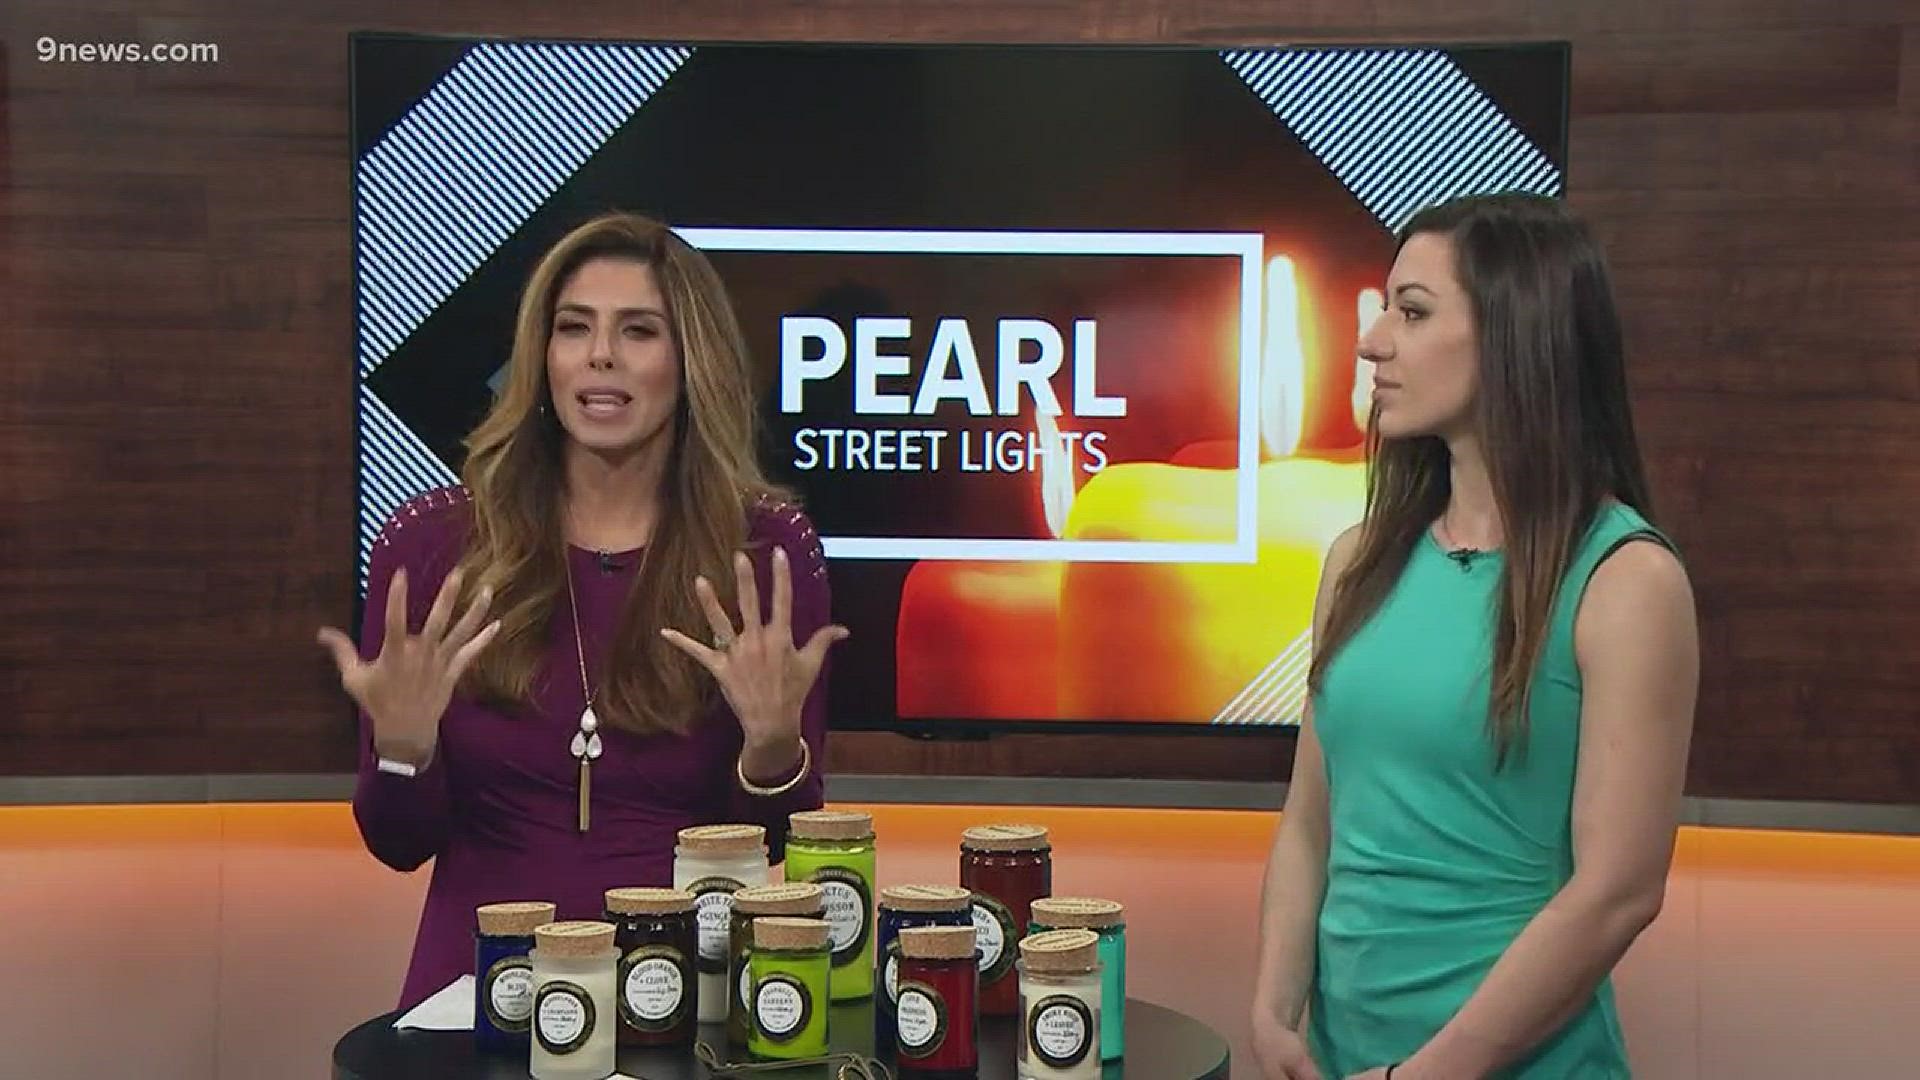 Pearl Street Lights creates hand-poured candles, wax melts, and candle accessories. They partner with Mile High Workshop, an organization that provides support and job training in the Denver area.